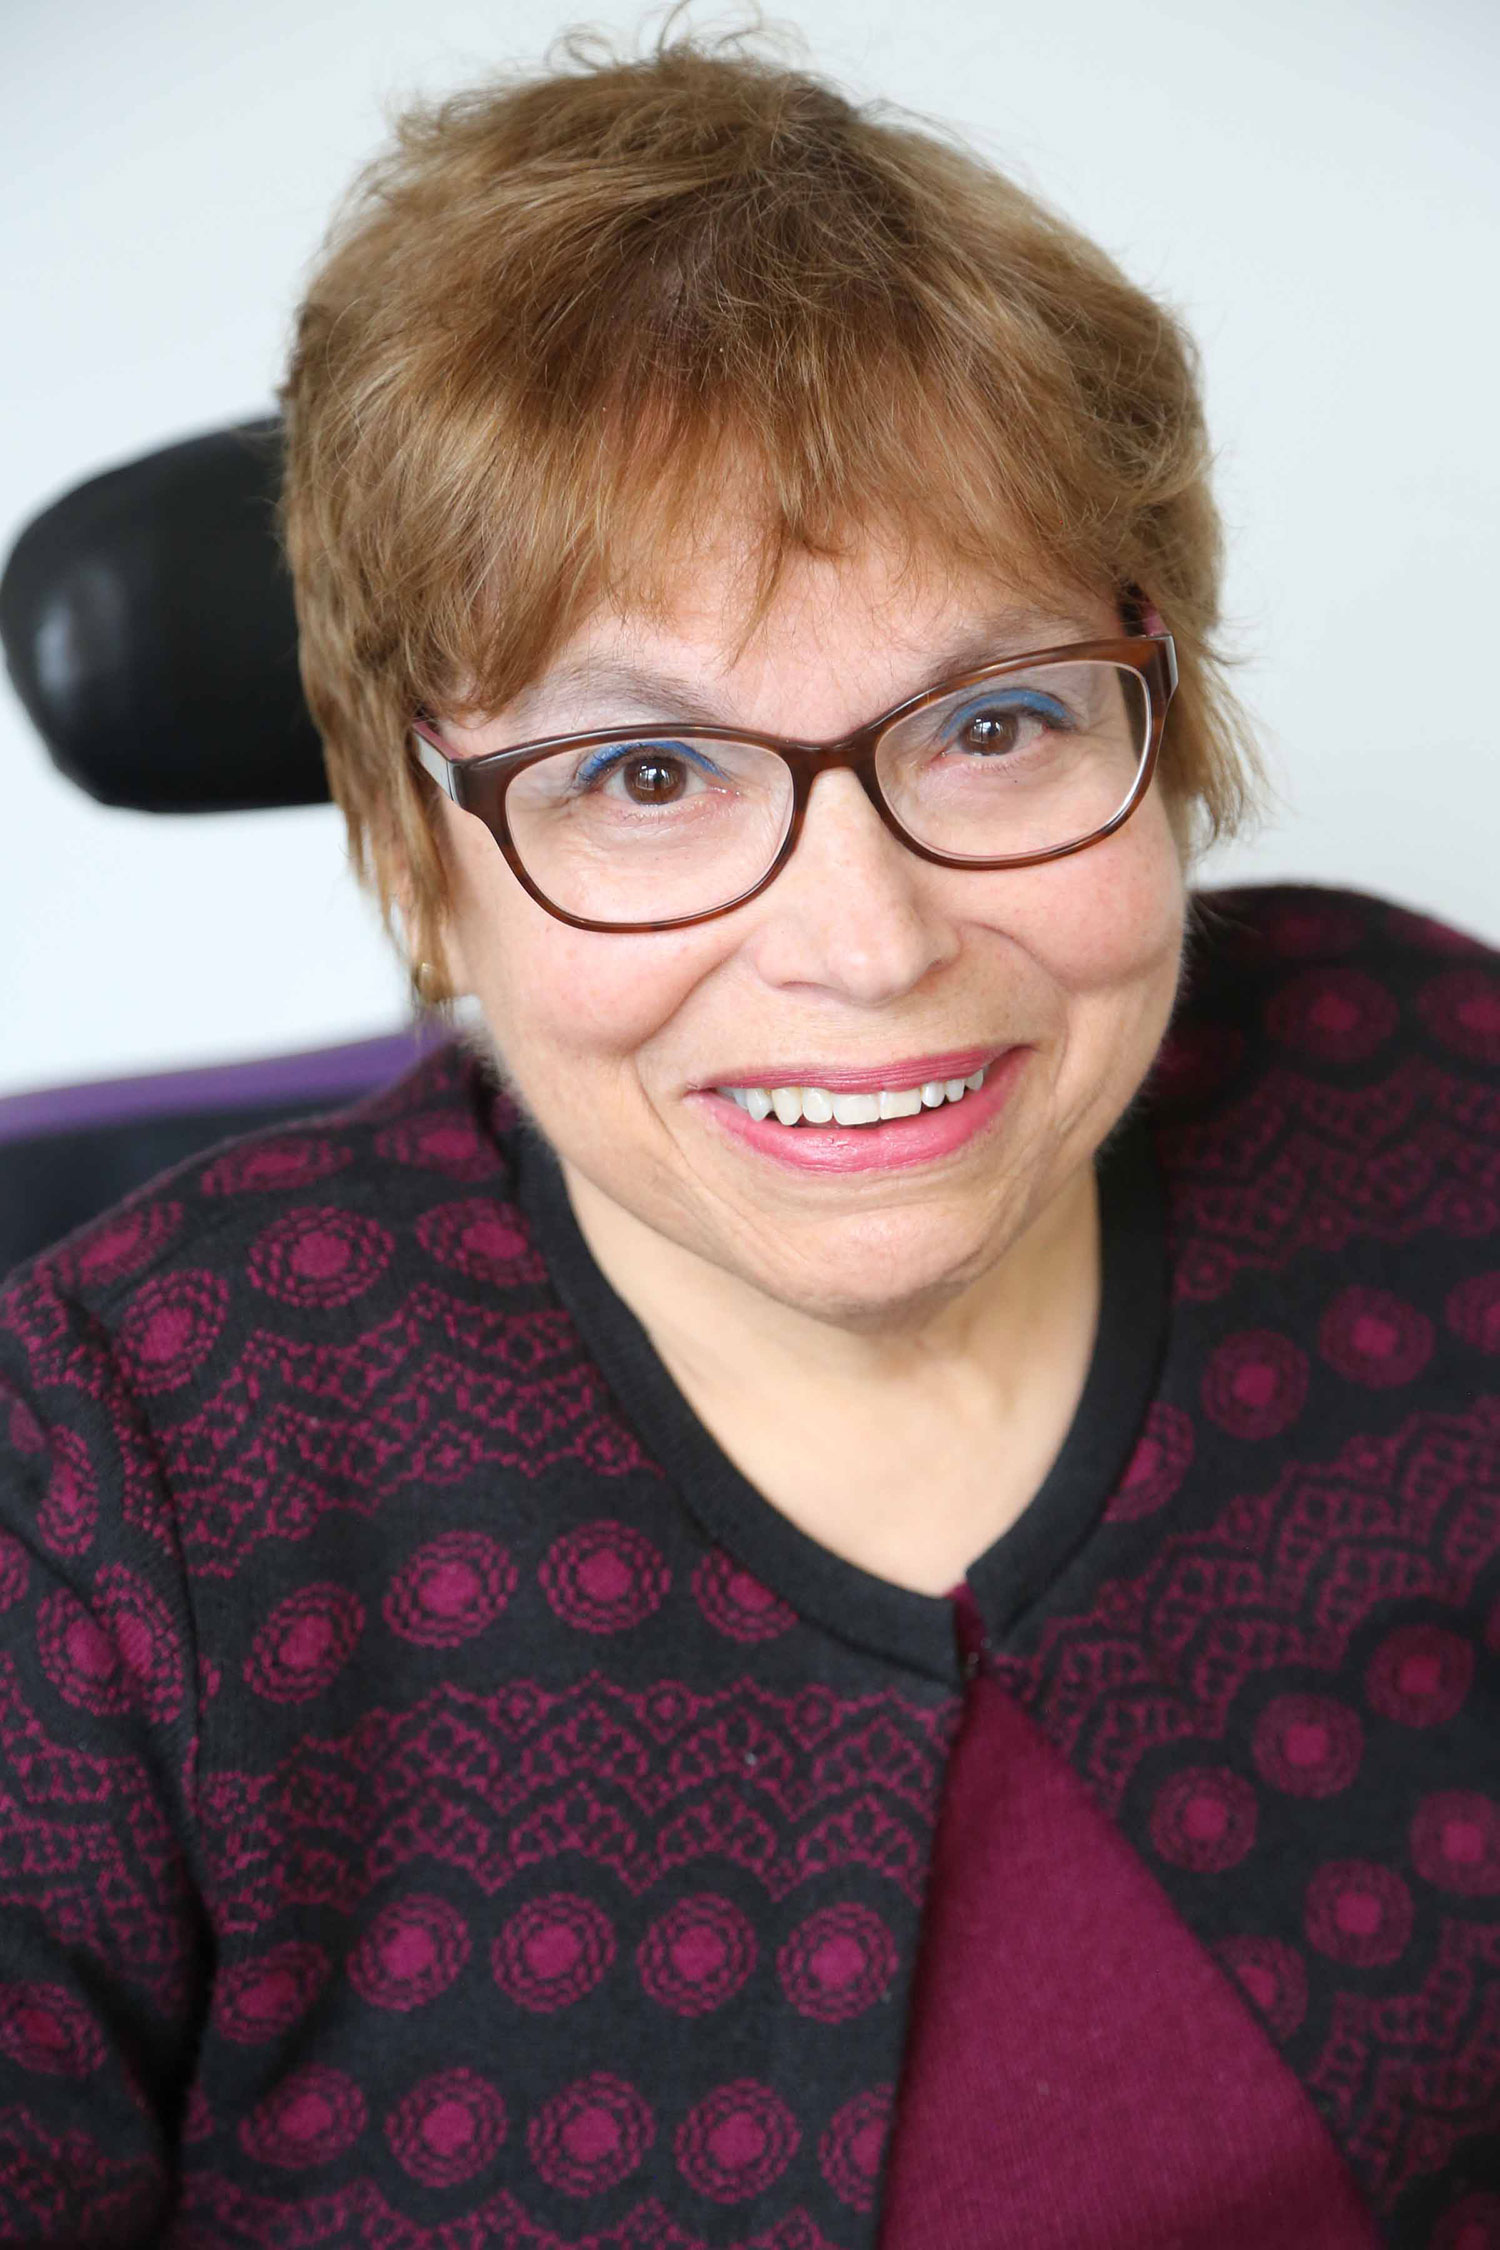 Headshot of Judith Heumann, smiling. She wears purple-ish glasses that match with her sweater, which has a geometric pattern. Her hair is goldish; Judith is white and is a wheelchair user.